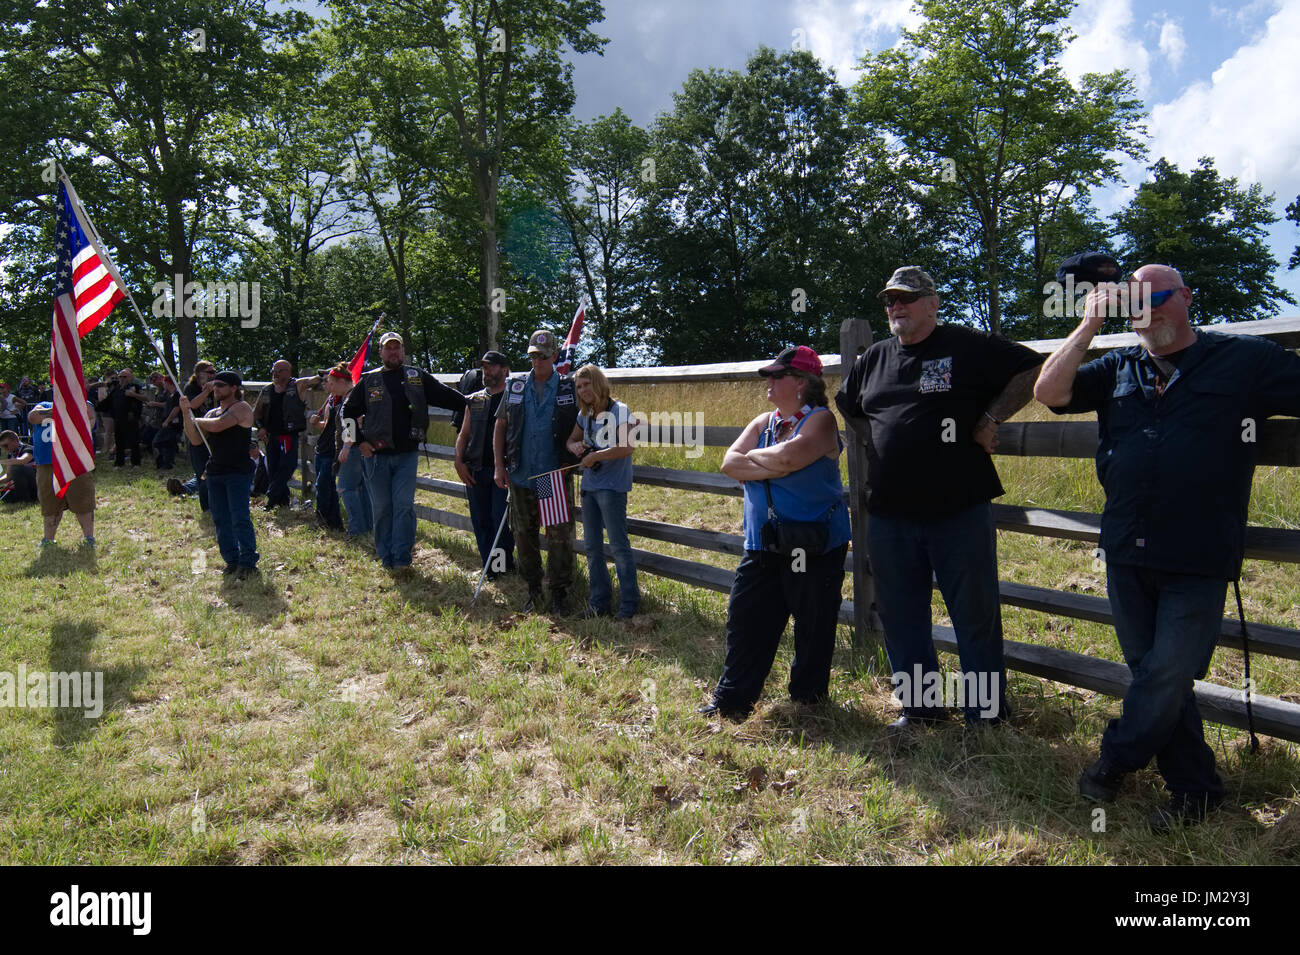 Participants at a patriotic free speech rally at Gettysburg National Military Park in Gettysburg, Pennsylvania. Stock Photo